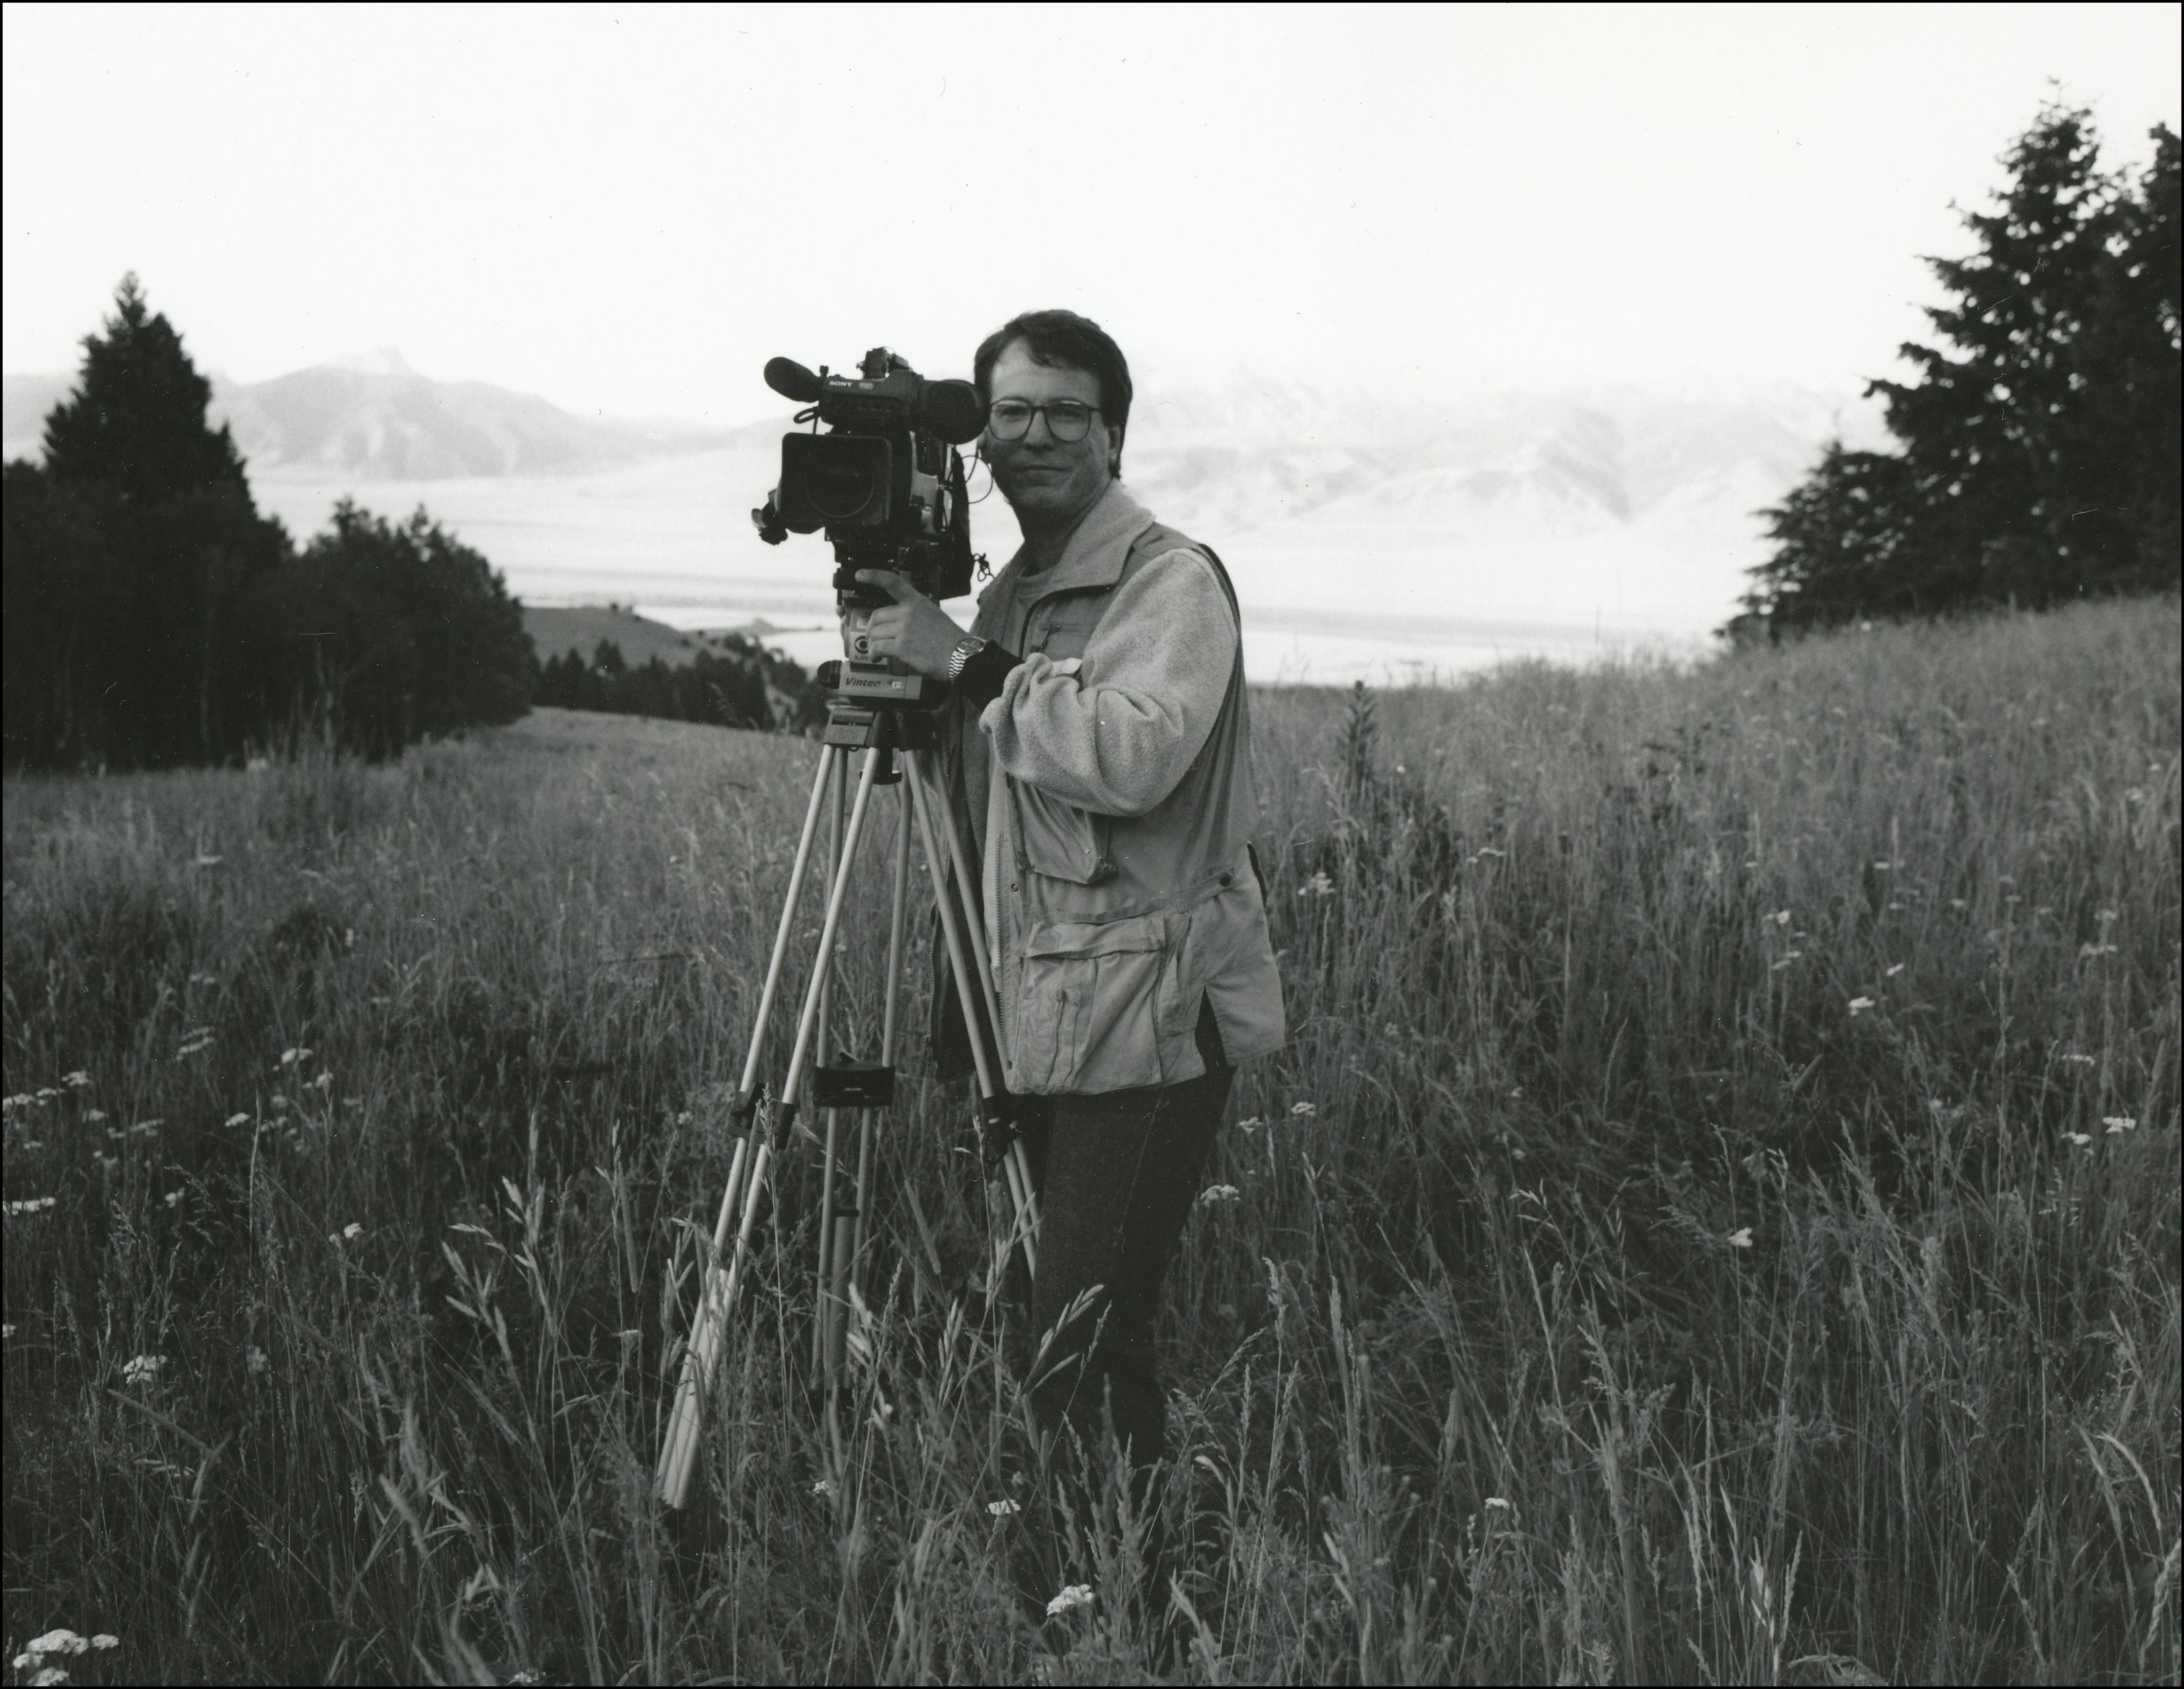 Man standing with his camera on a tripod in an open grassy area with mountains in background